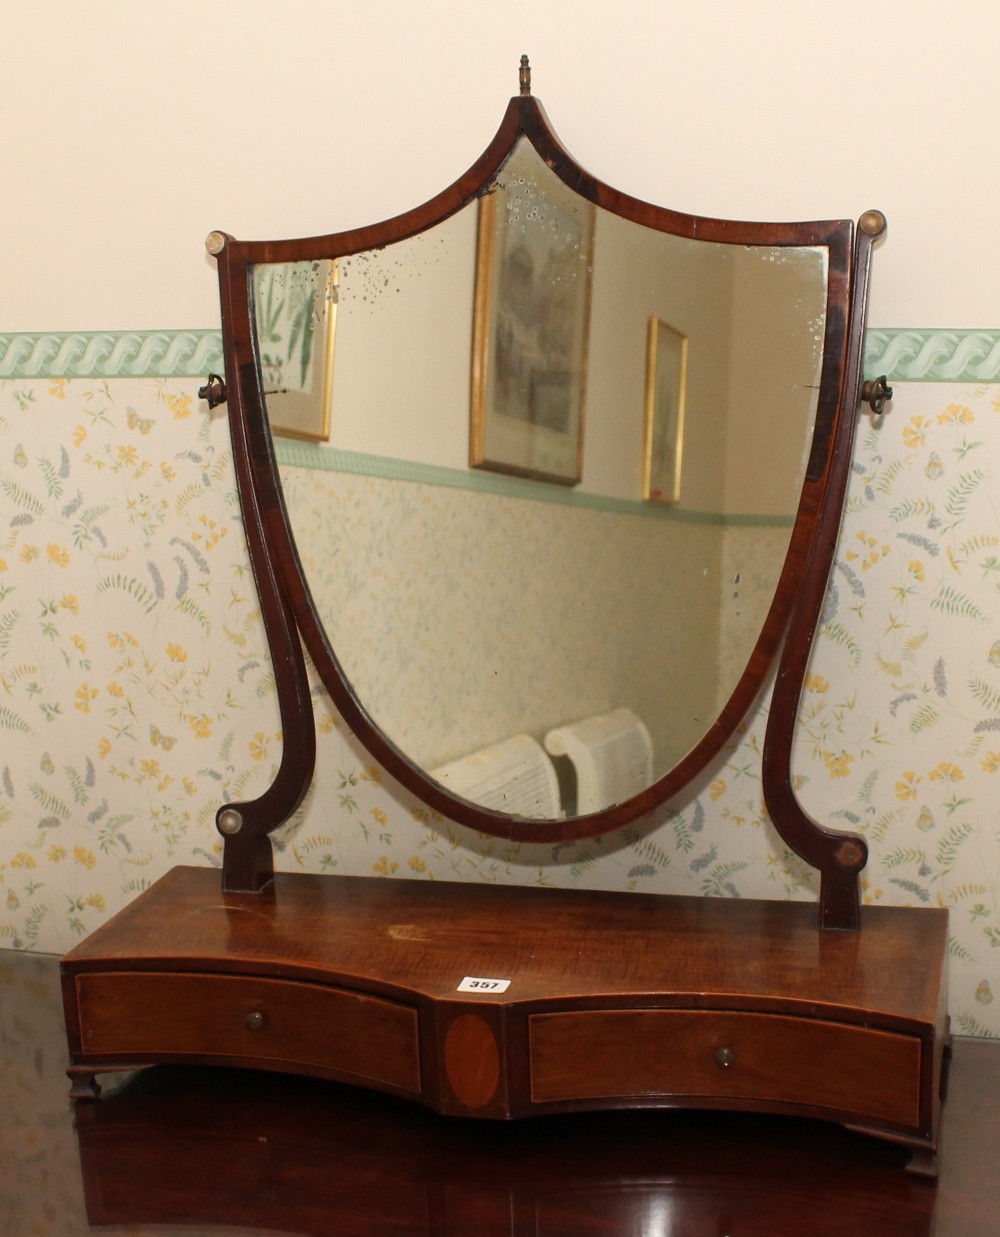 19th century mahogany inlaid shield-shaped dressing table mirror with drawers to the platform base.